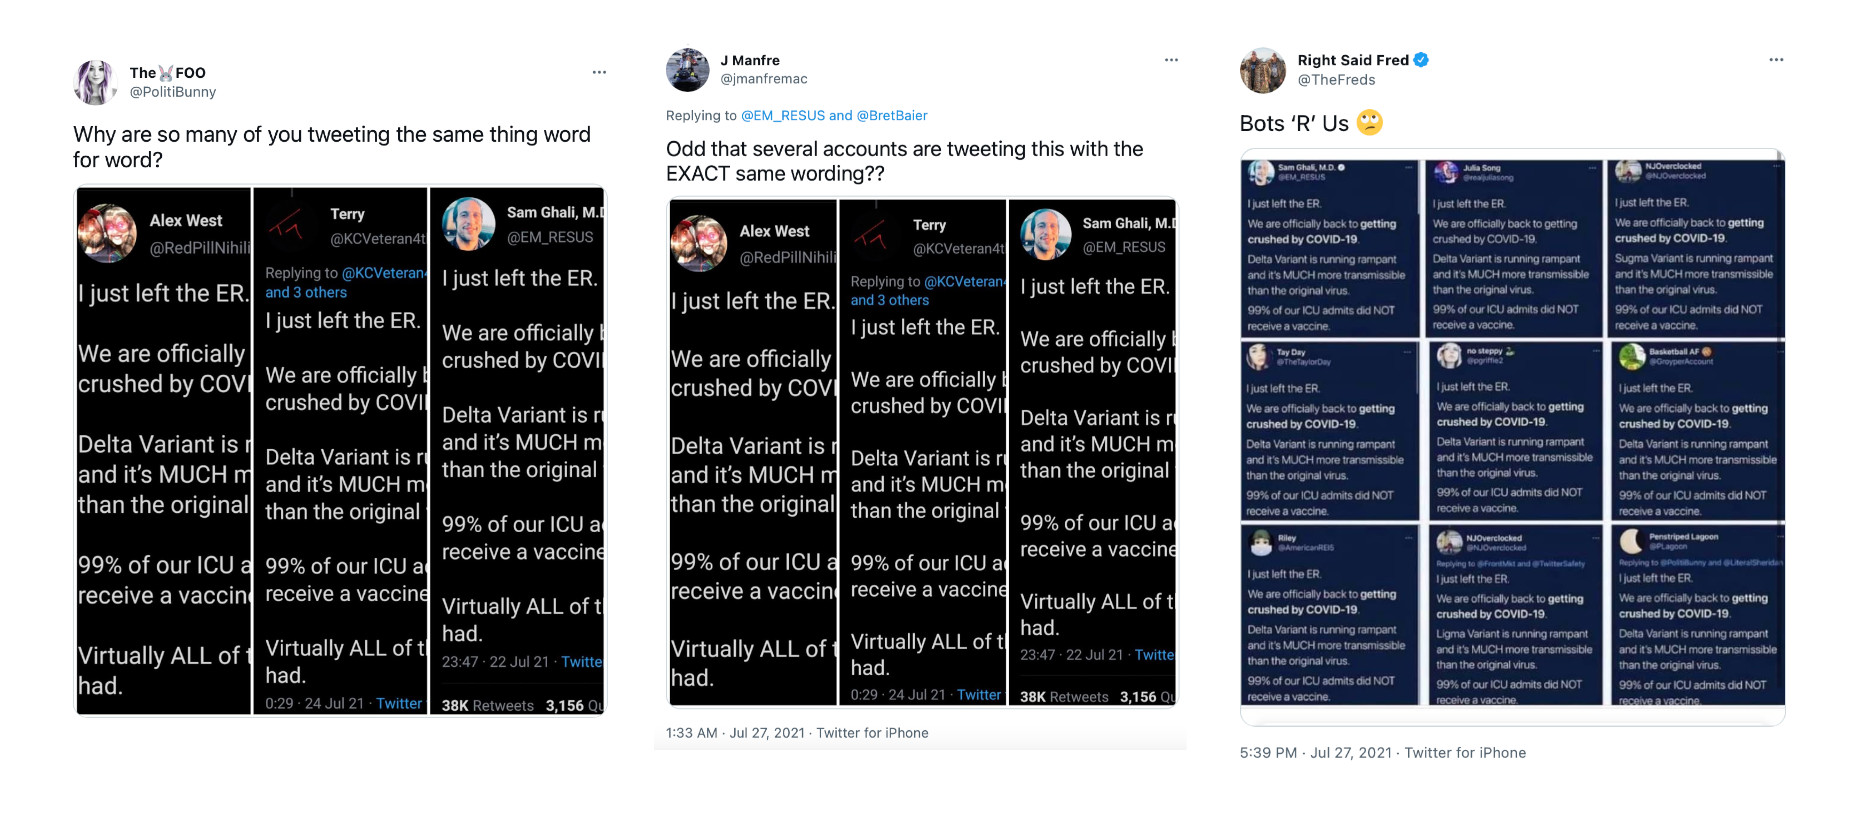 Copypasta of an ICU doctor's tweet stokes COVID-19 skepticism by